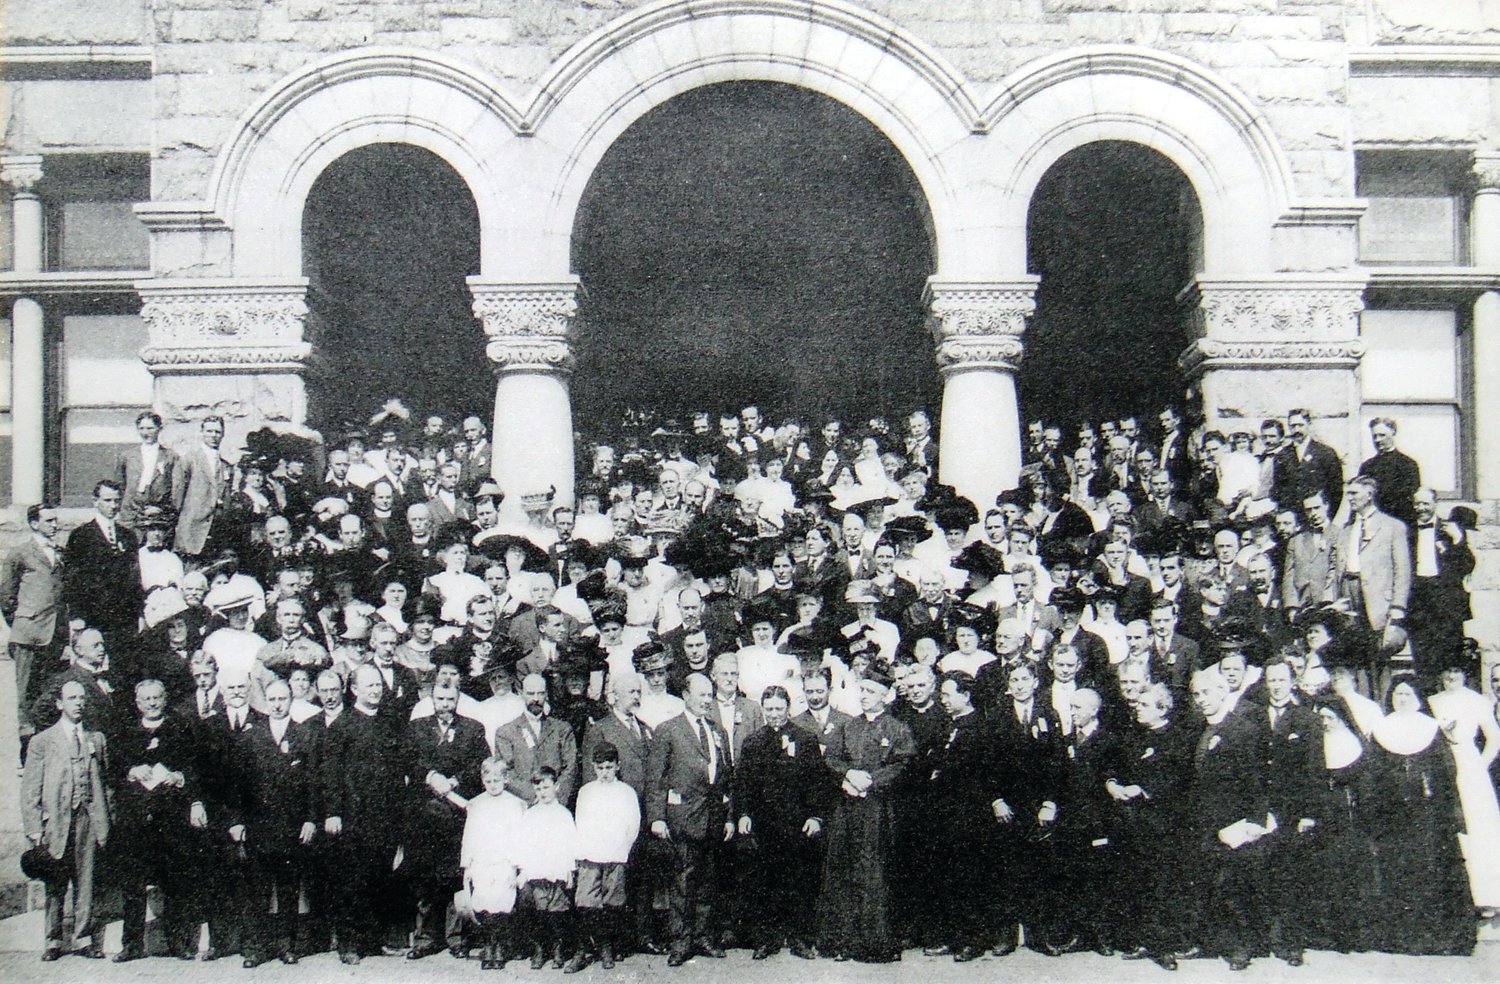 In September 1910, nearly 400 people involved in Catholic charitable work—clergy, lay and re­ligious men and women, social workers, and academics—gathered at The Catholic University of America in Washington, DC, for the historic founding of the National Conference of Catholic Charities (NCCC).